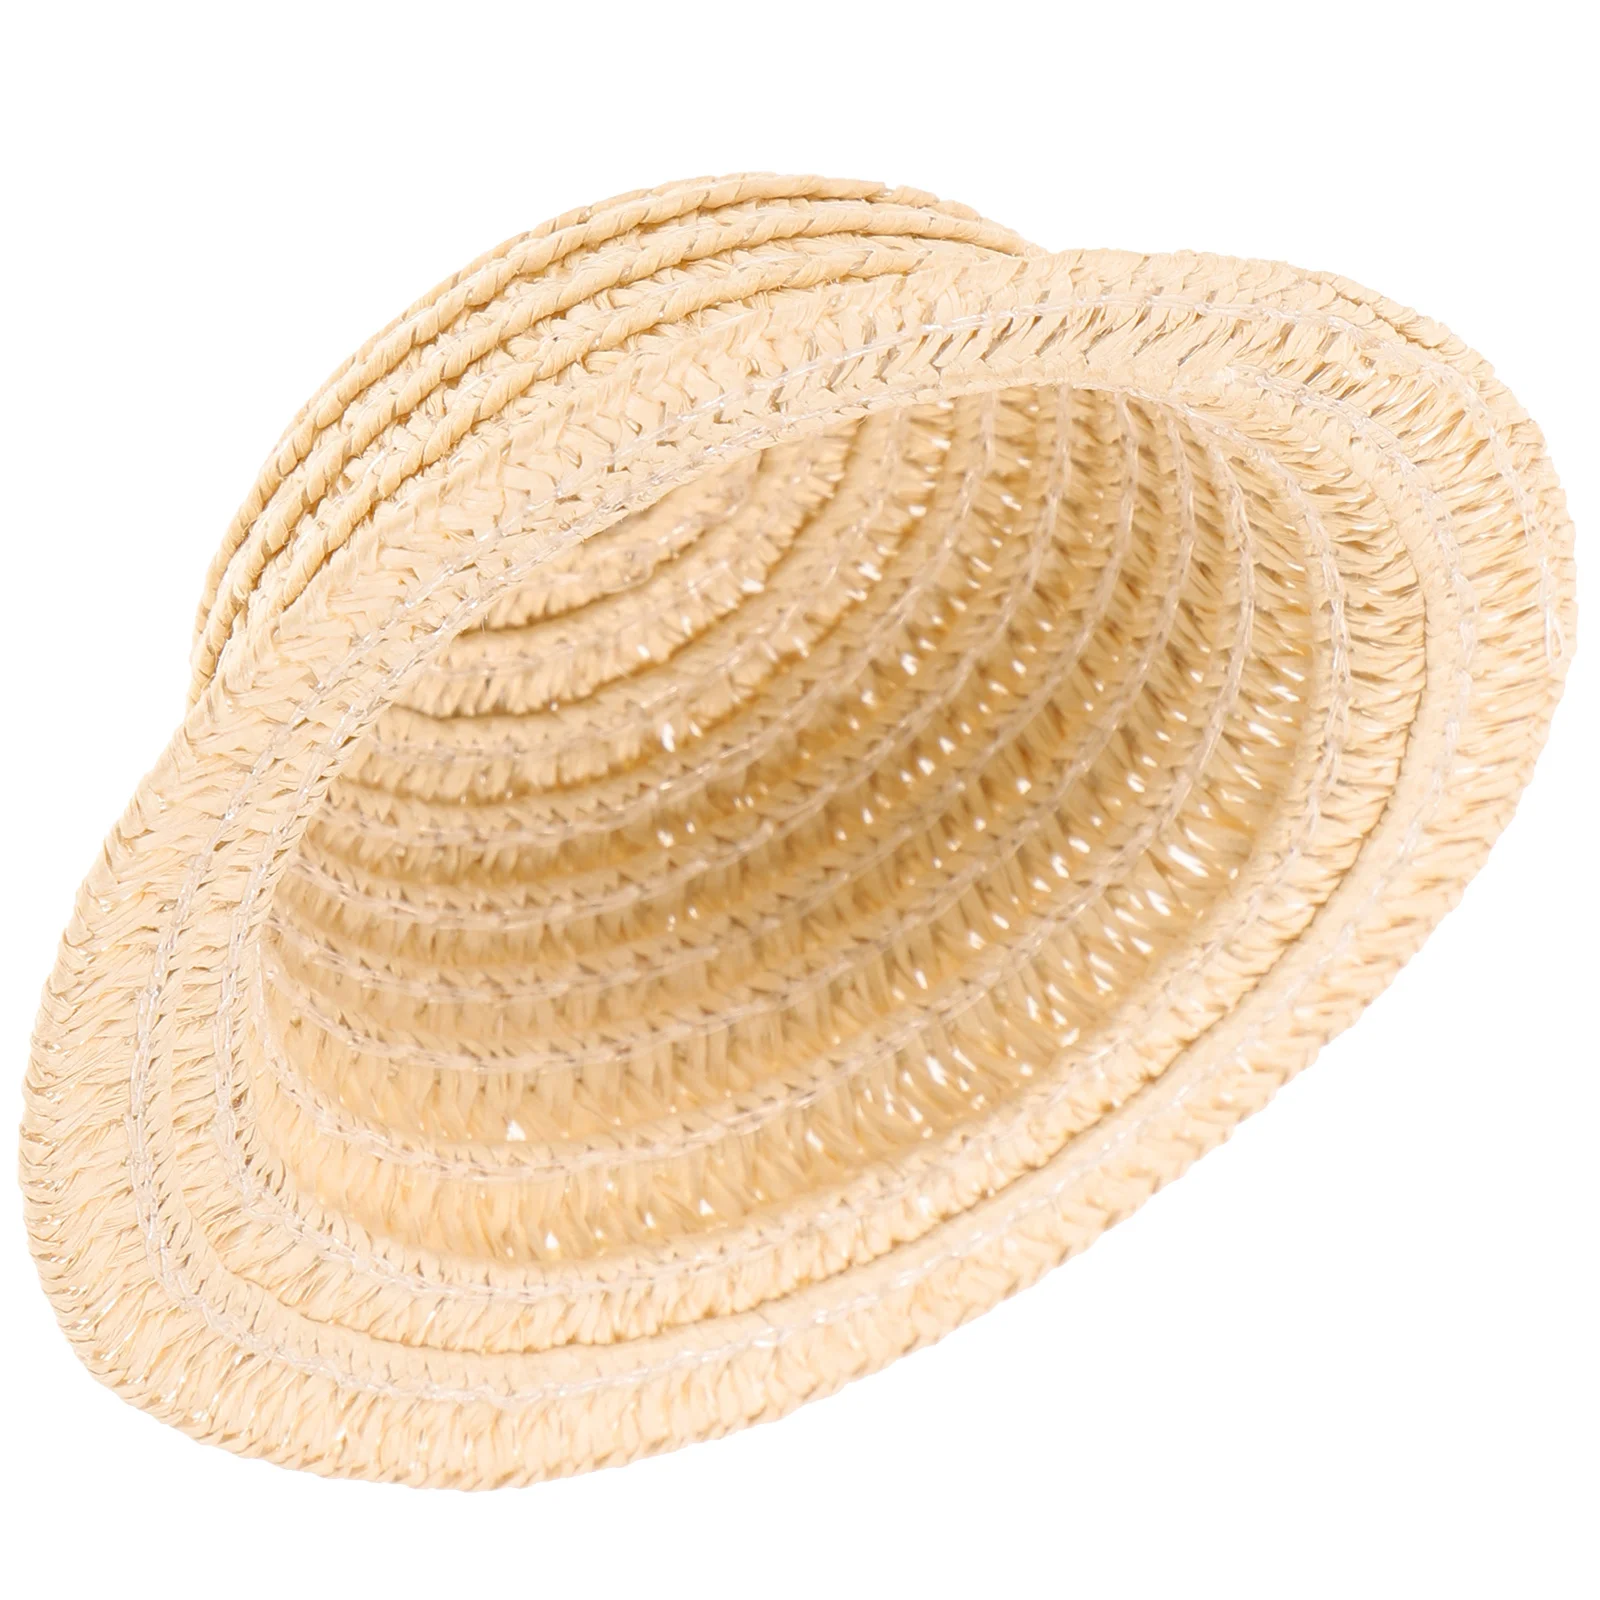 Straw Hat Mini DIY Top Has Baby Weaving Craft Woven Decor House Ornament Adornment Model Crafts